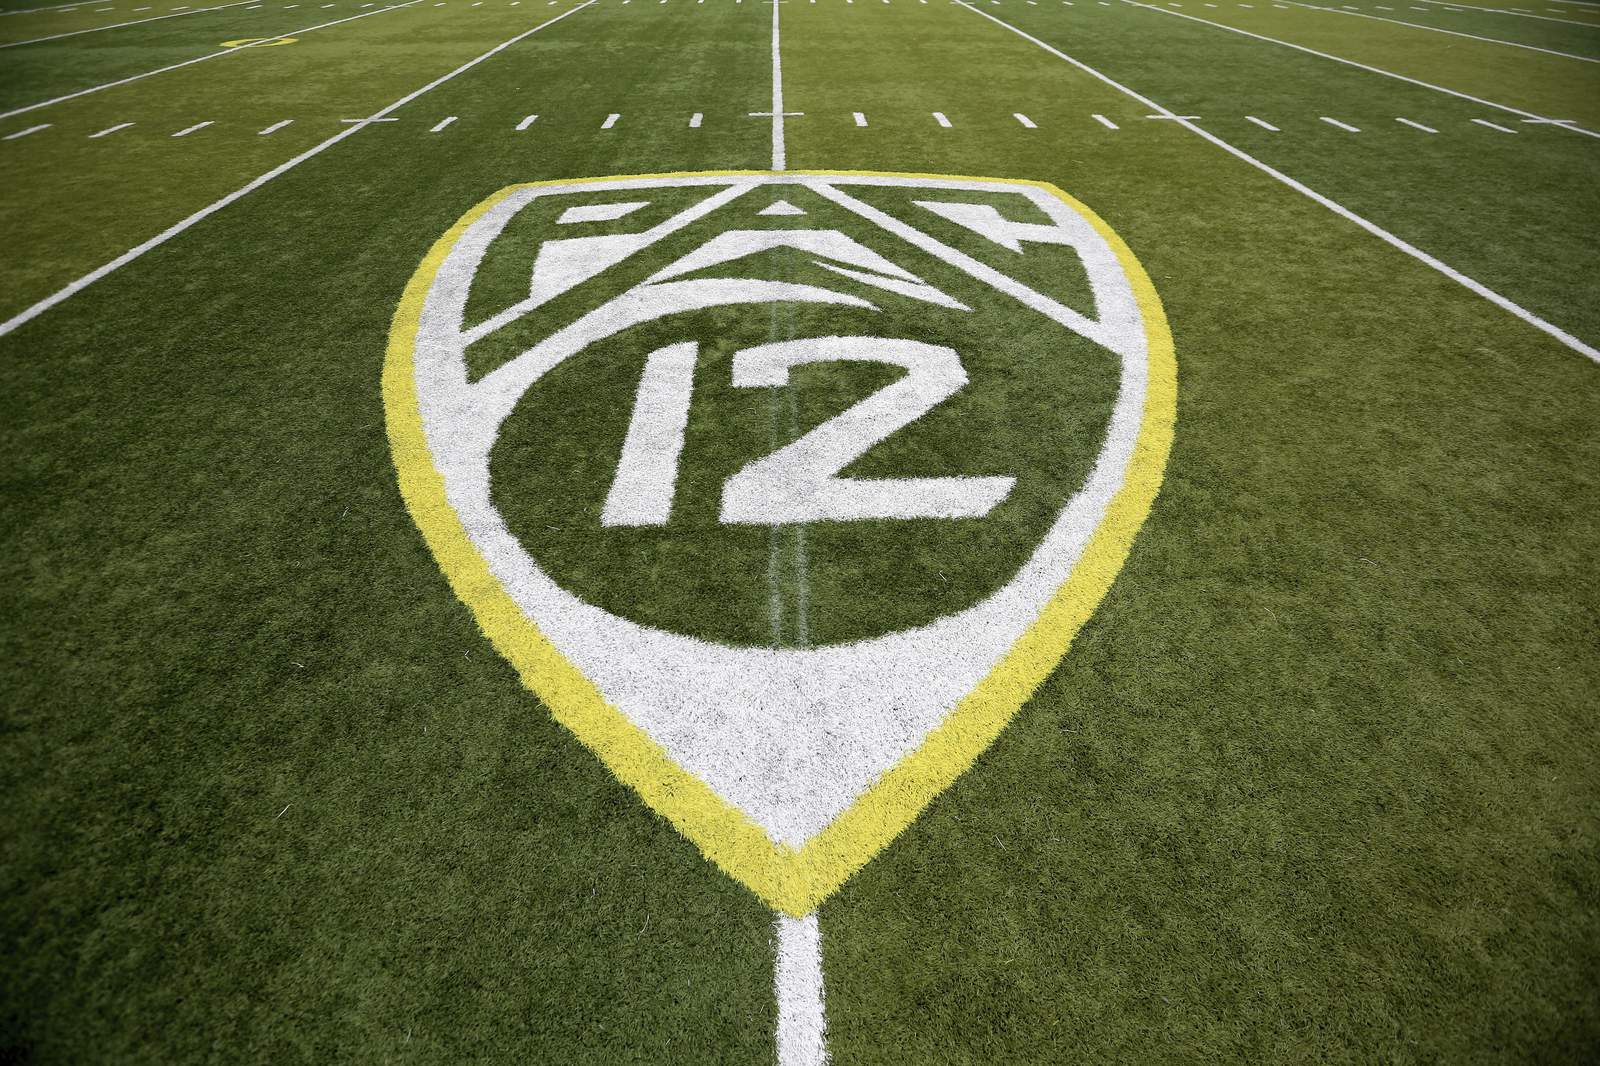 AP Sources: Pac-12 football to kick off in fall